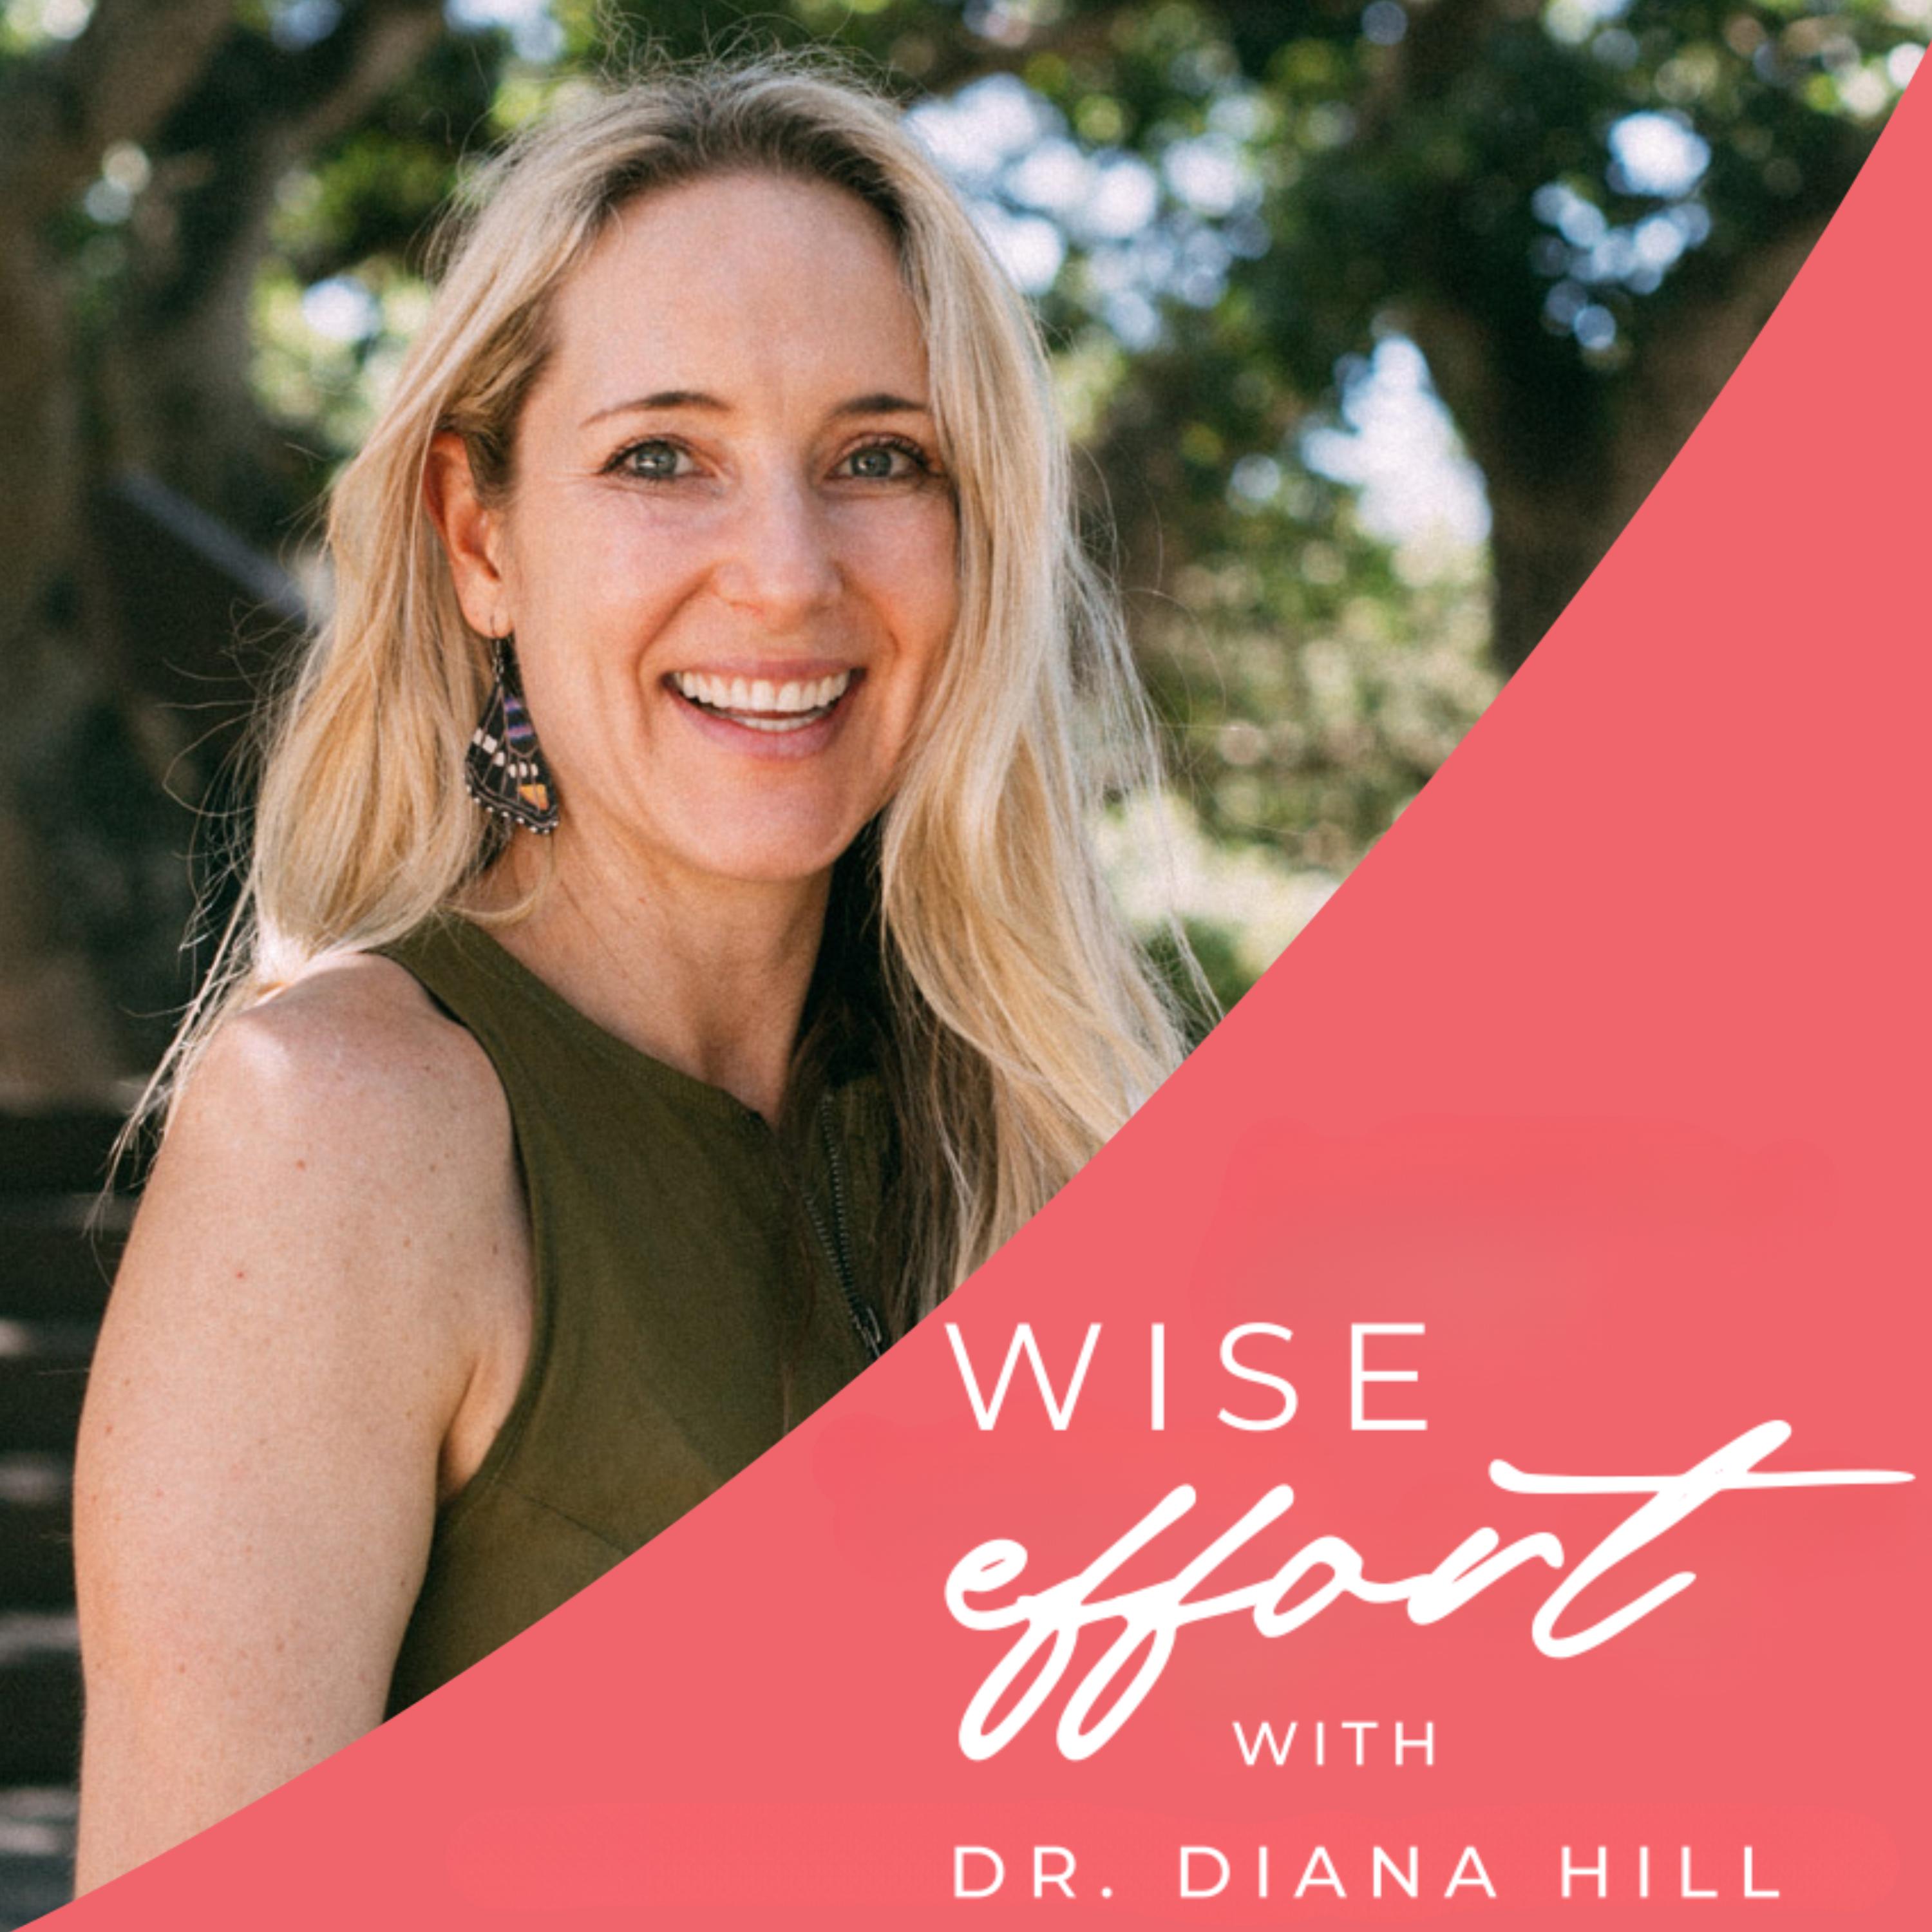 104 Cover WE The One Skill You Need to Grow Wise With Dr. Diana Hill